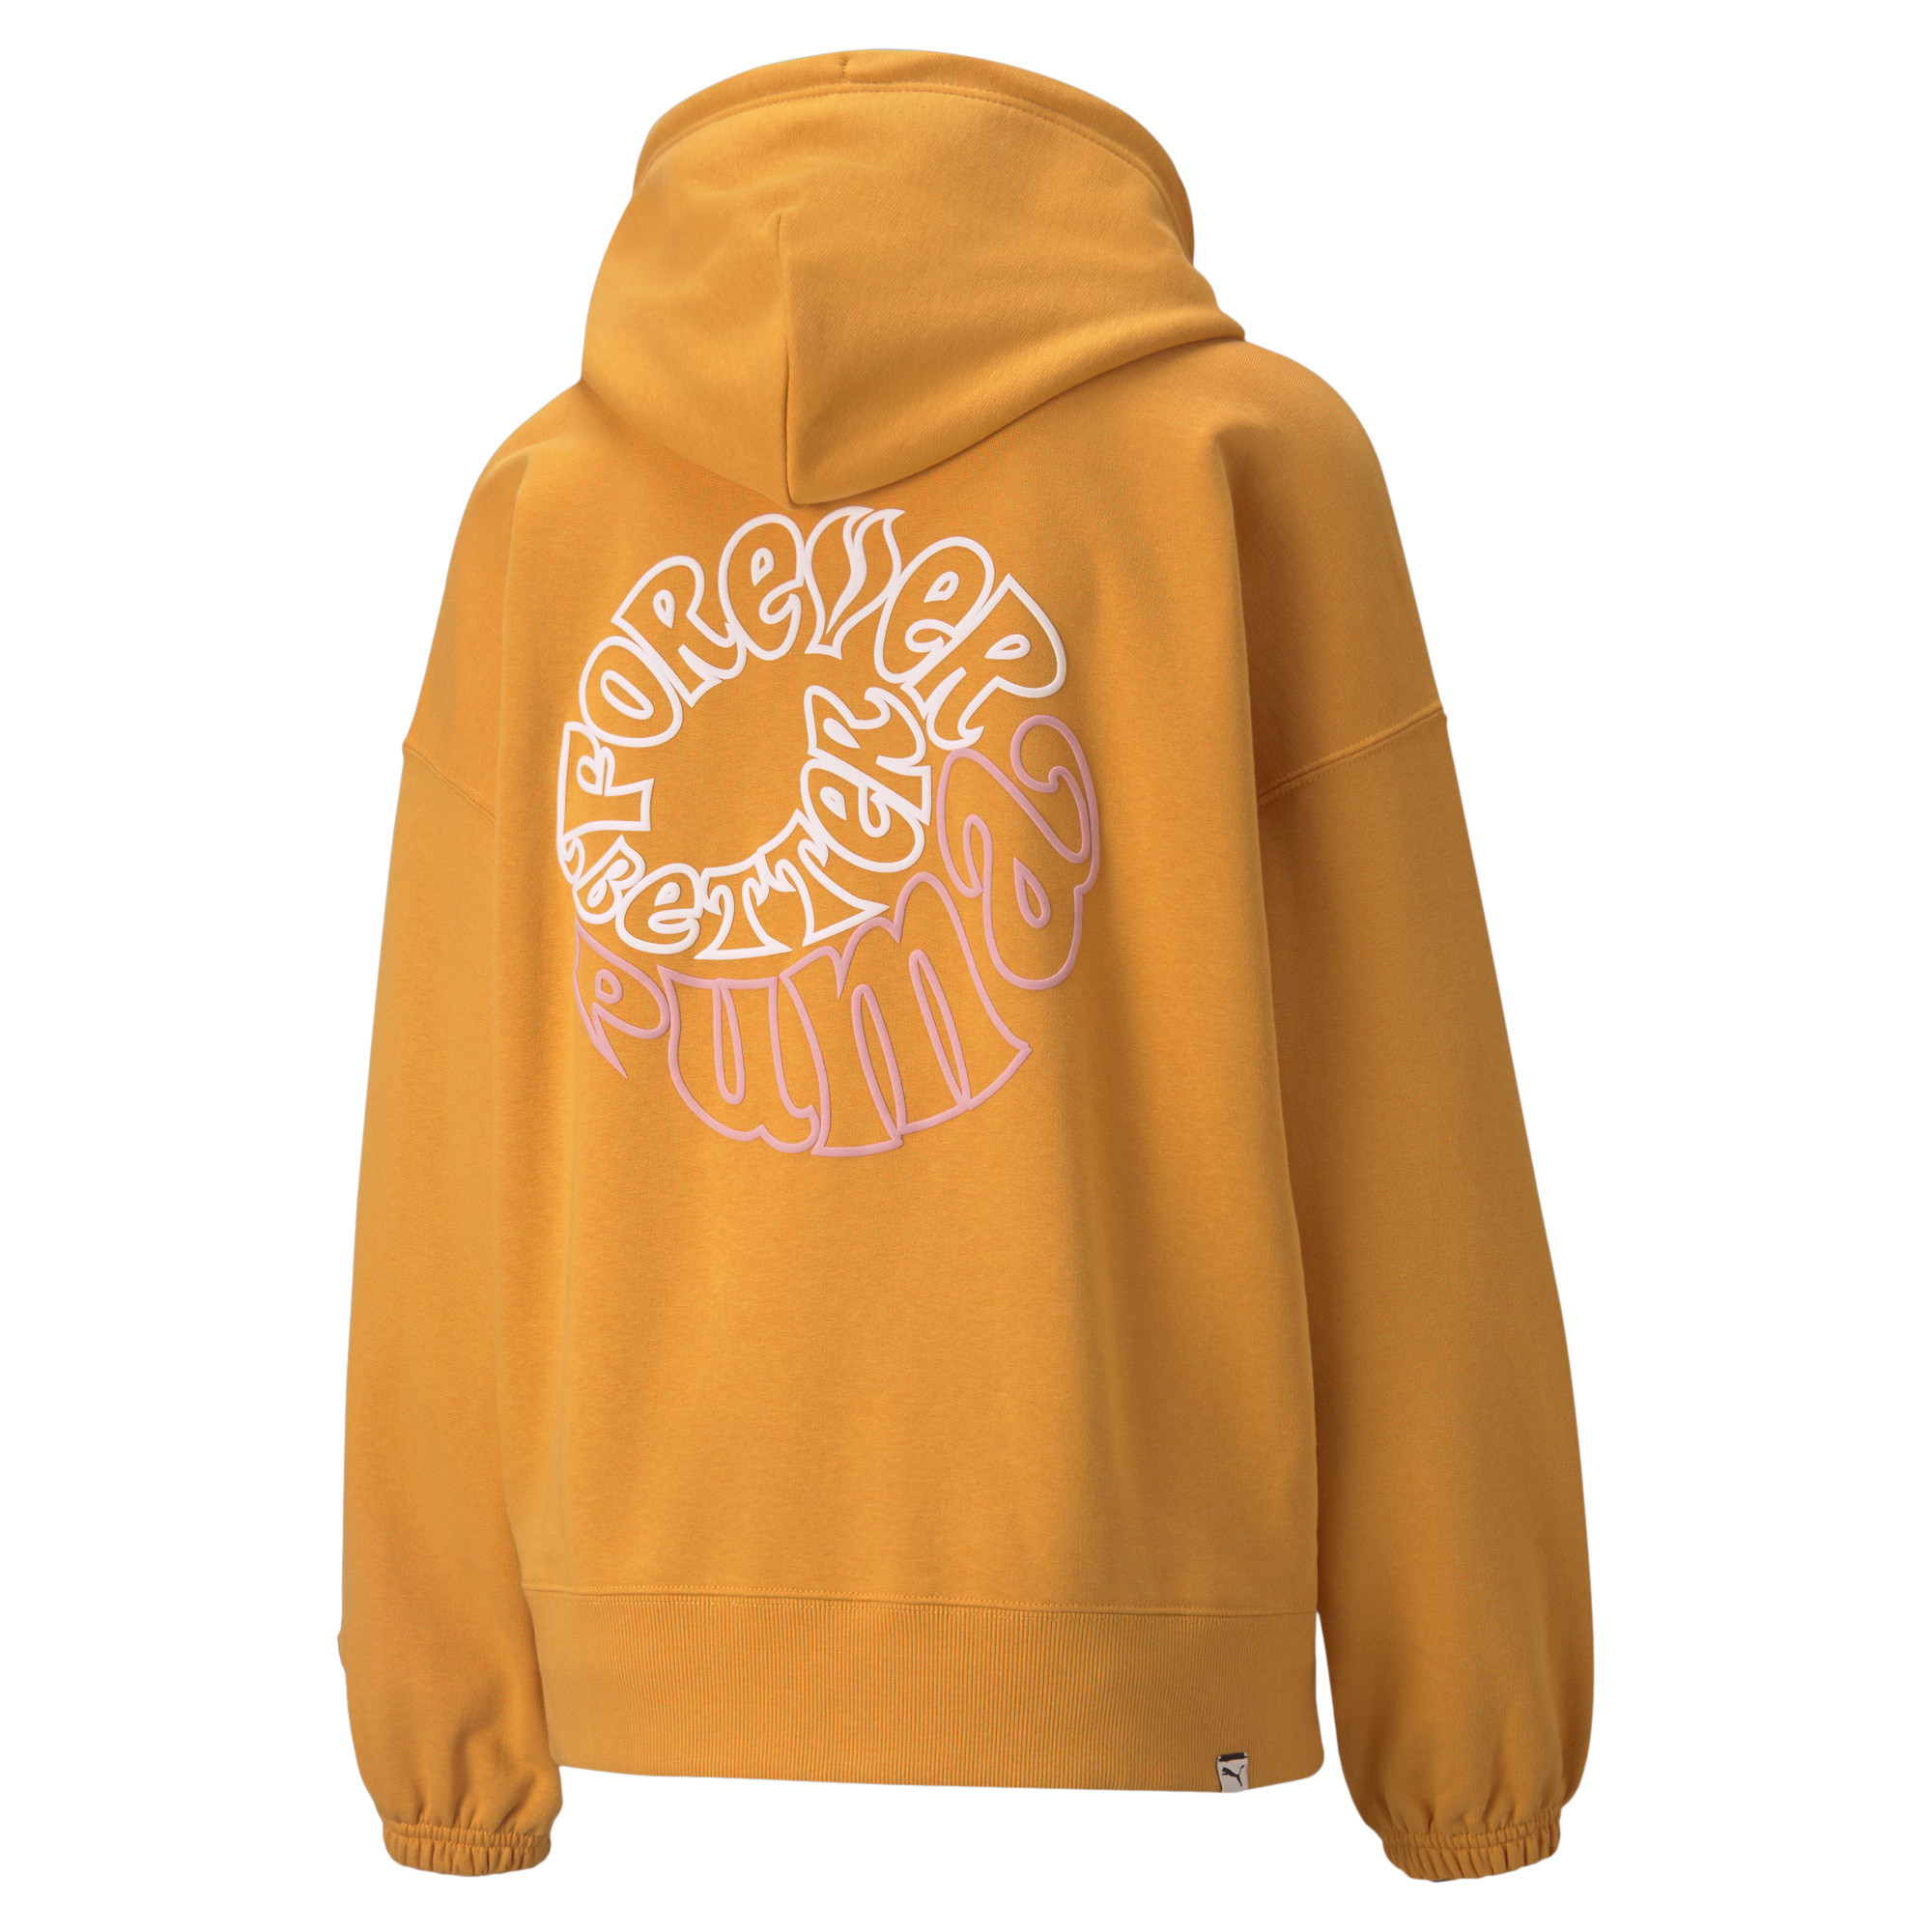 Downtown Graphic Hoodie, Yellow, large image number 1